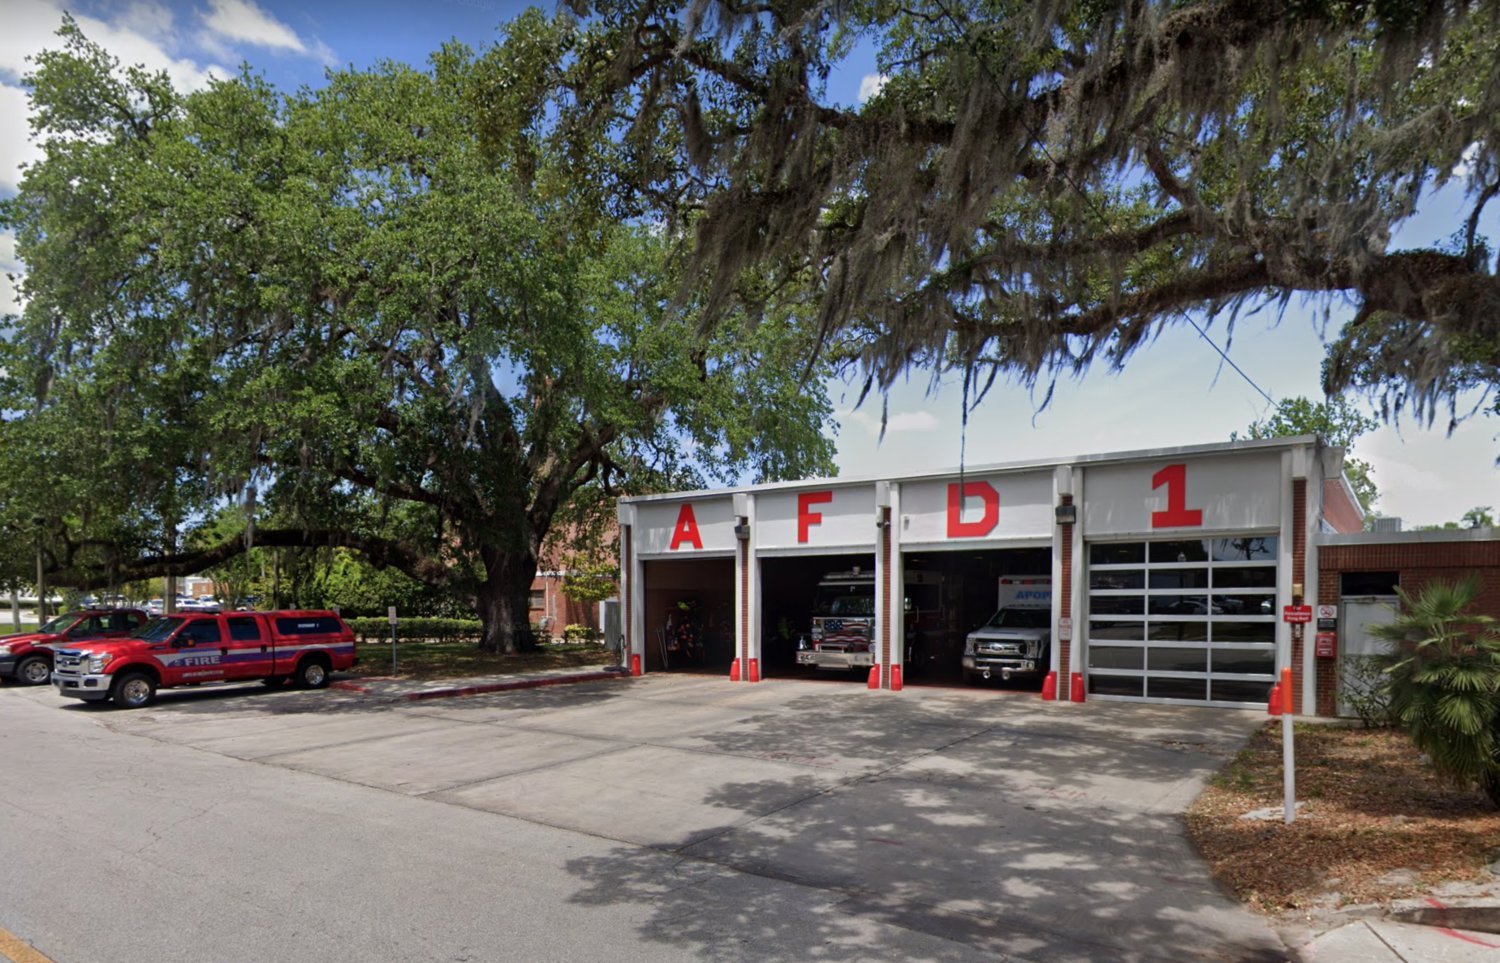 no-confidence-apopka-firefighters-union-votes-overwhelmingly-against